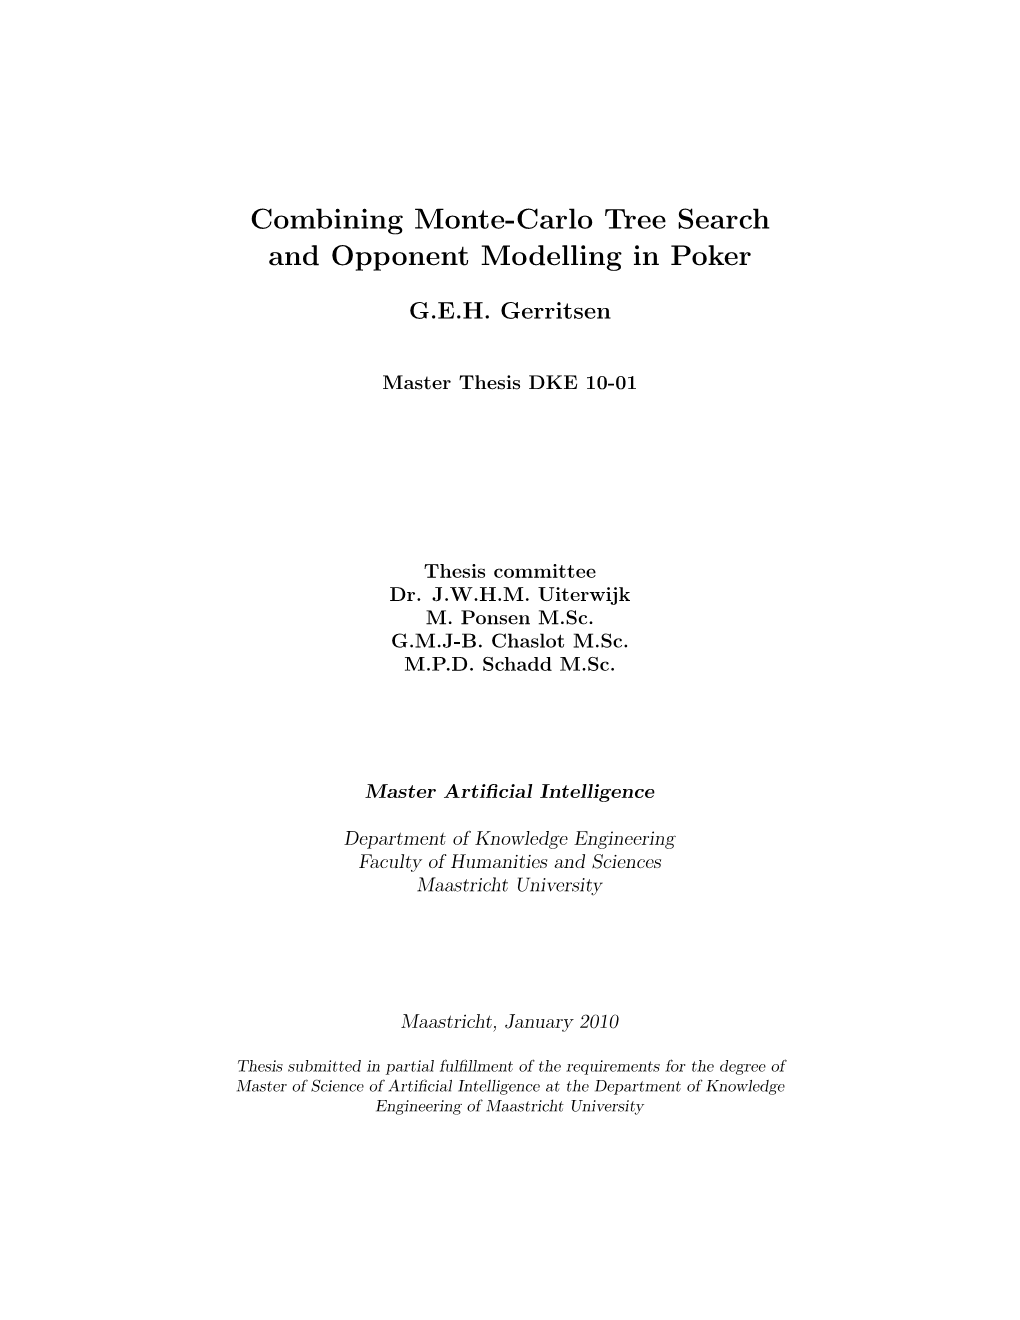 Combining Monte-Carlo Tree Search and Opponent Modelling in Poker